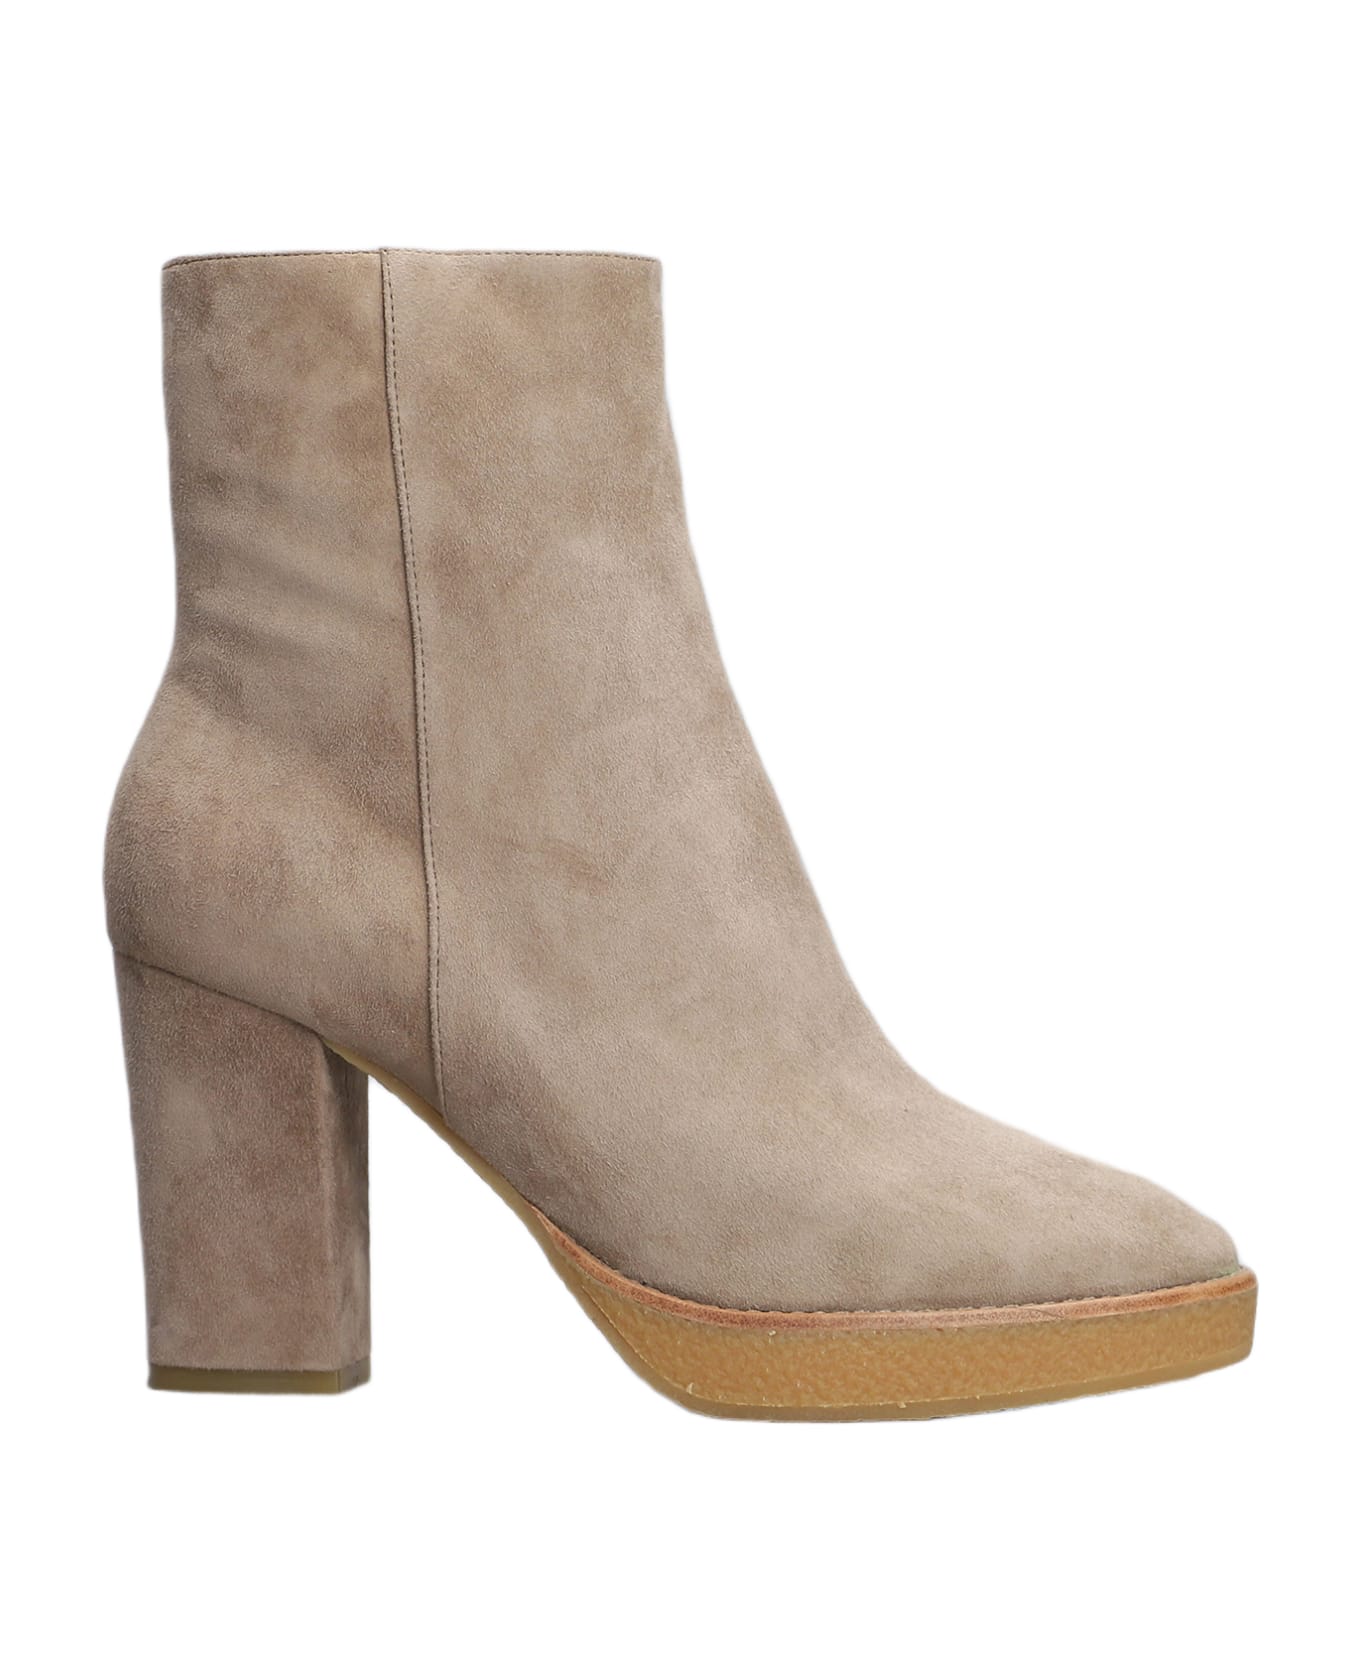 Lola Cruz High Heels Ankle Boots In Taupe Suede - taupe